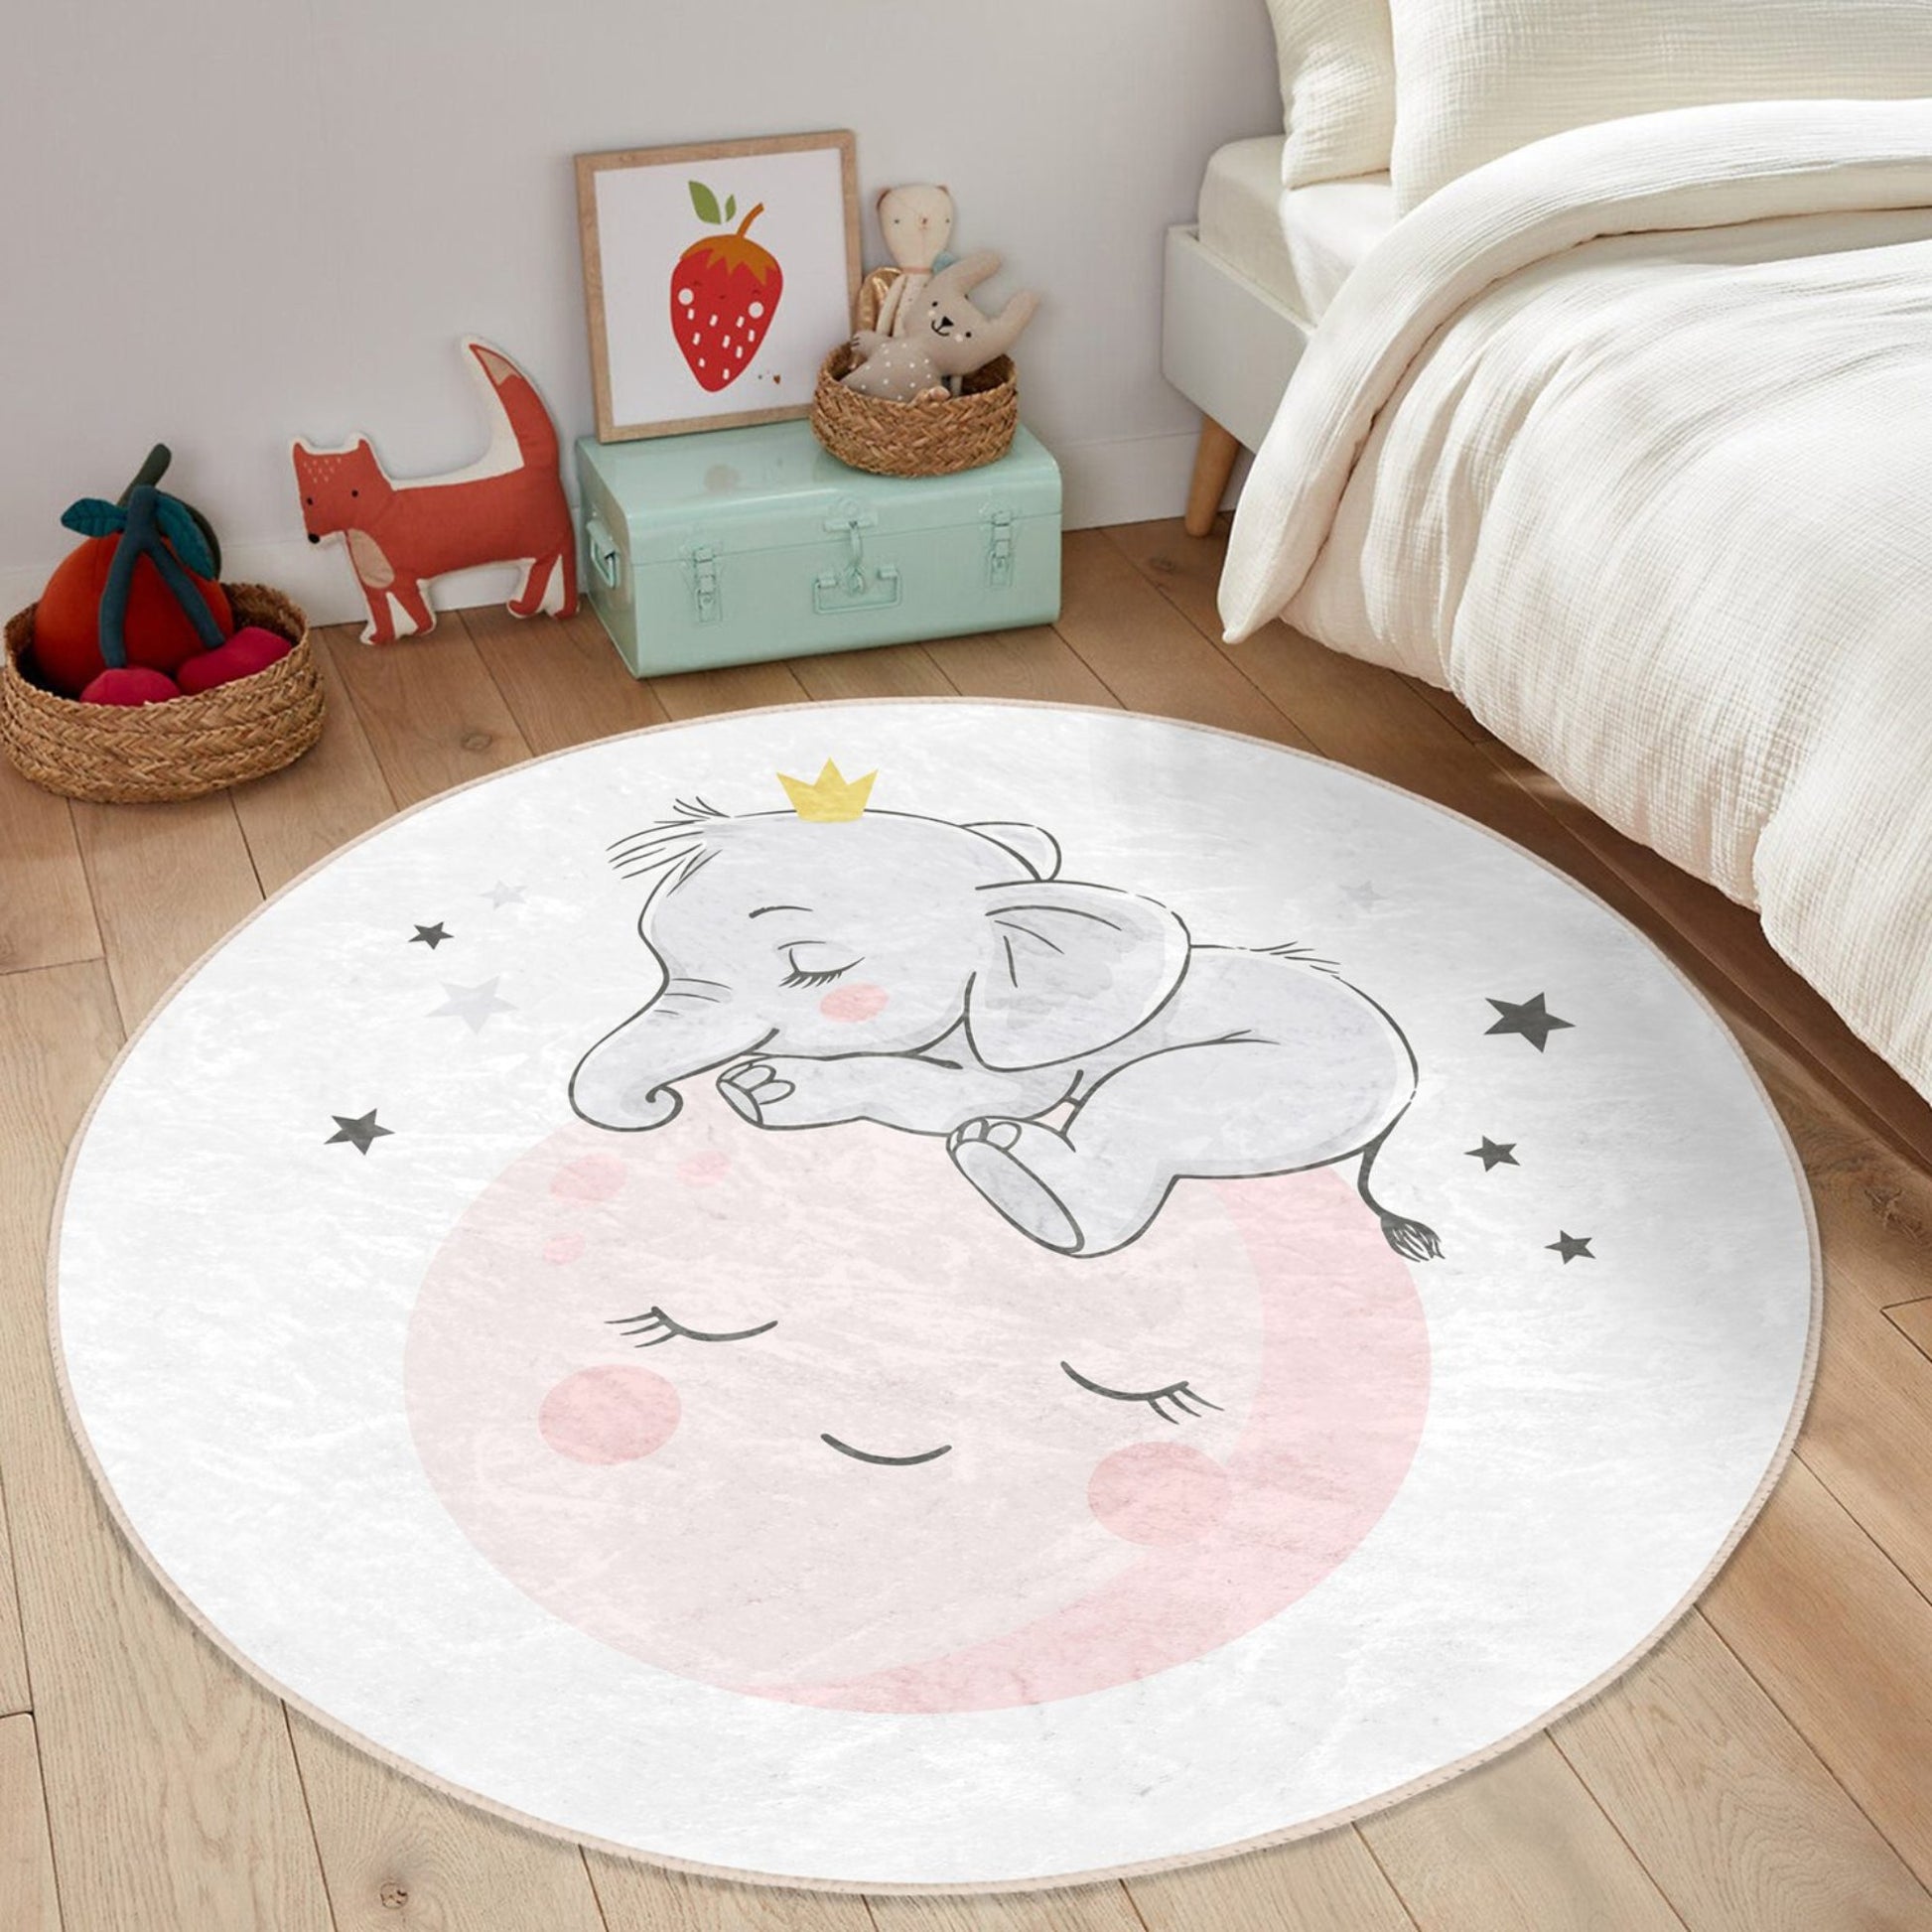 Washable Rug with Elephant on the Moon Print - Easy Maintenance